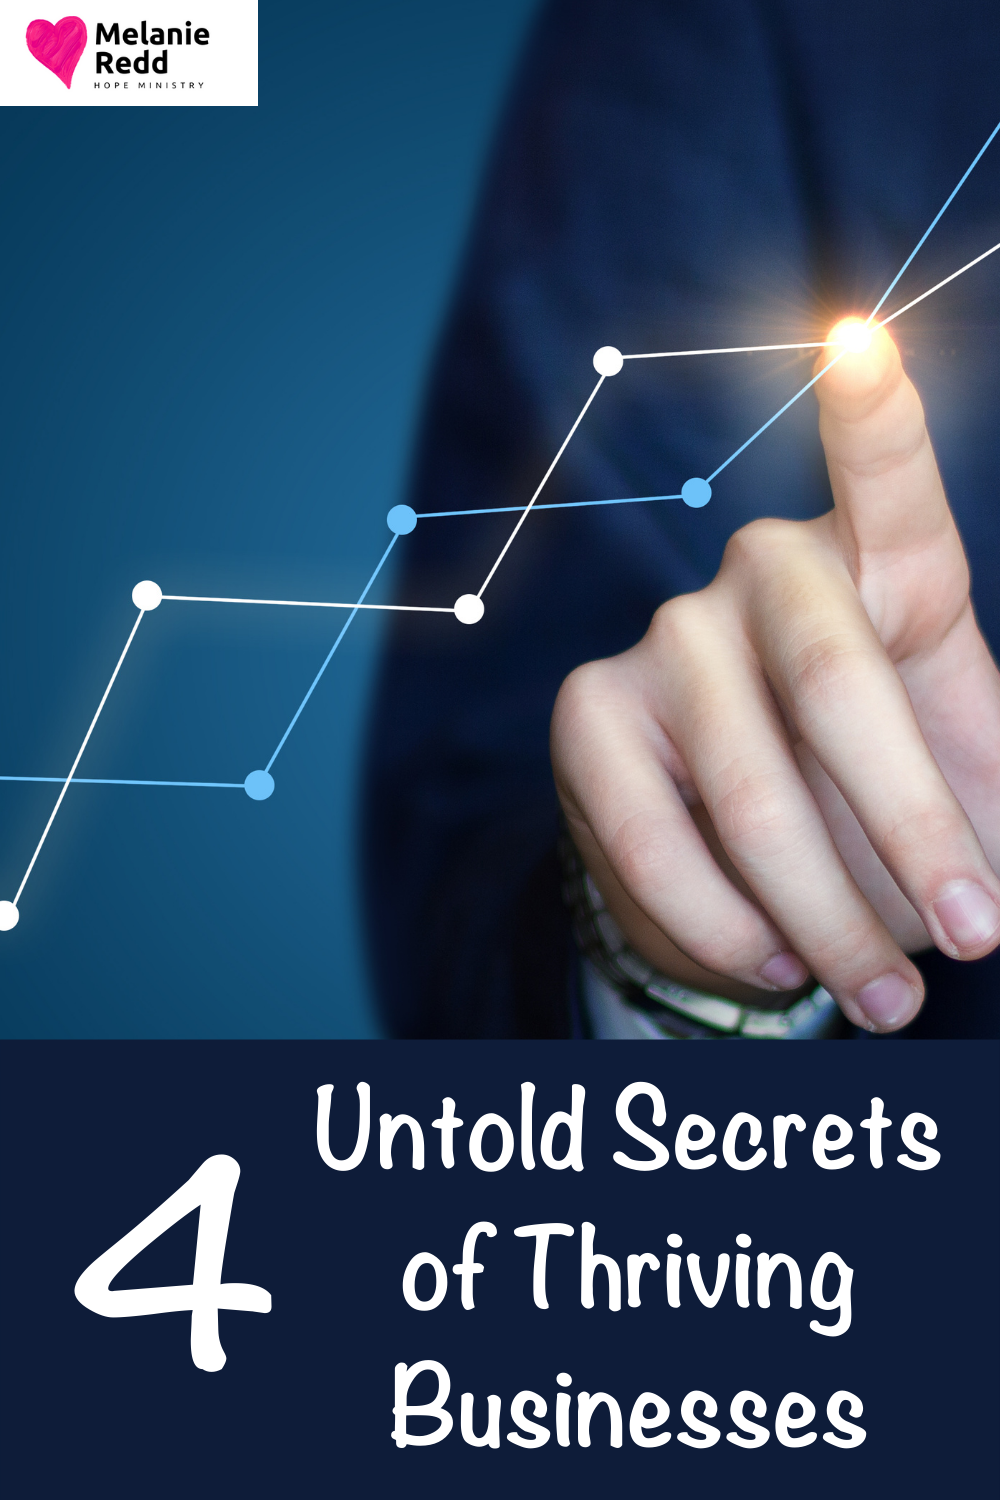 Do you have a small business or manage a larger one? Would you like some tips? Here are 4 Untold Secrets of Thriving Businesses.